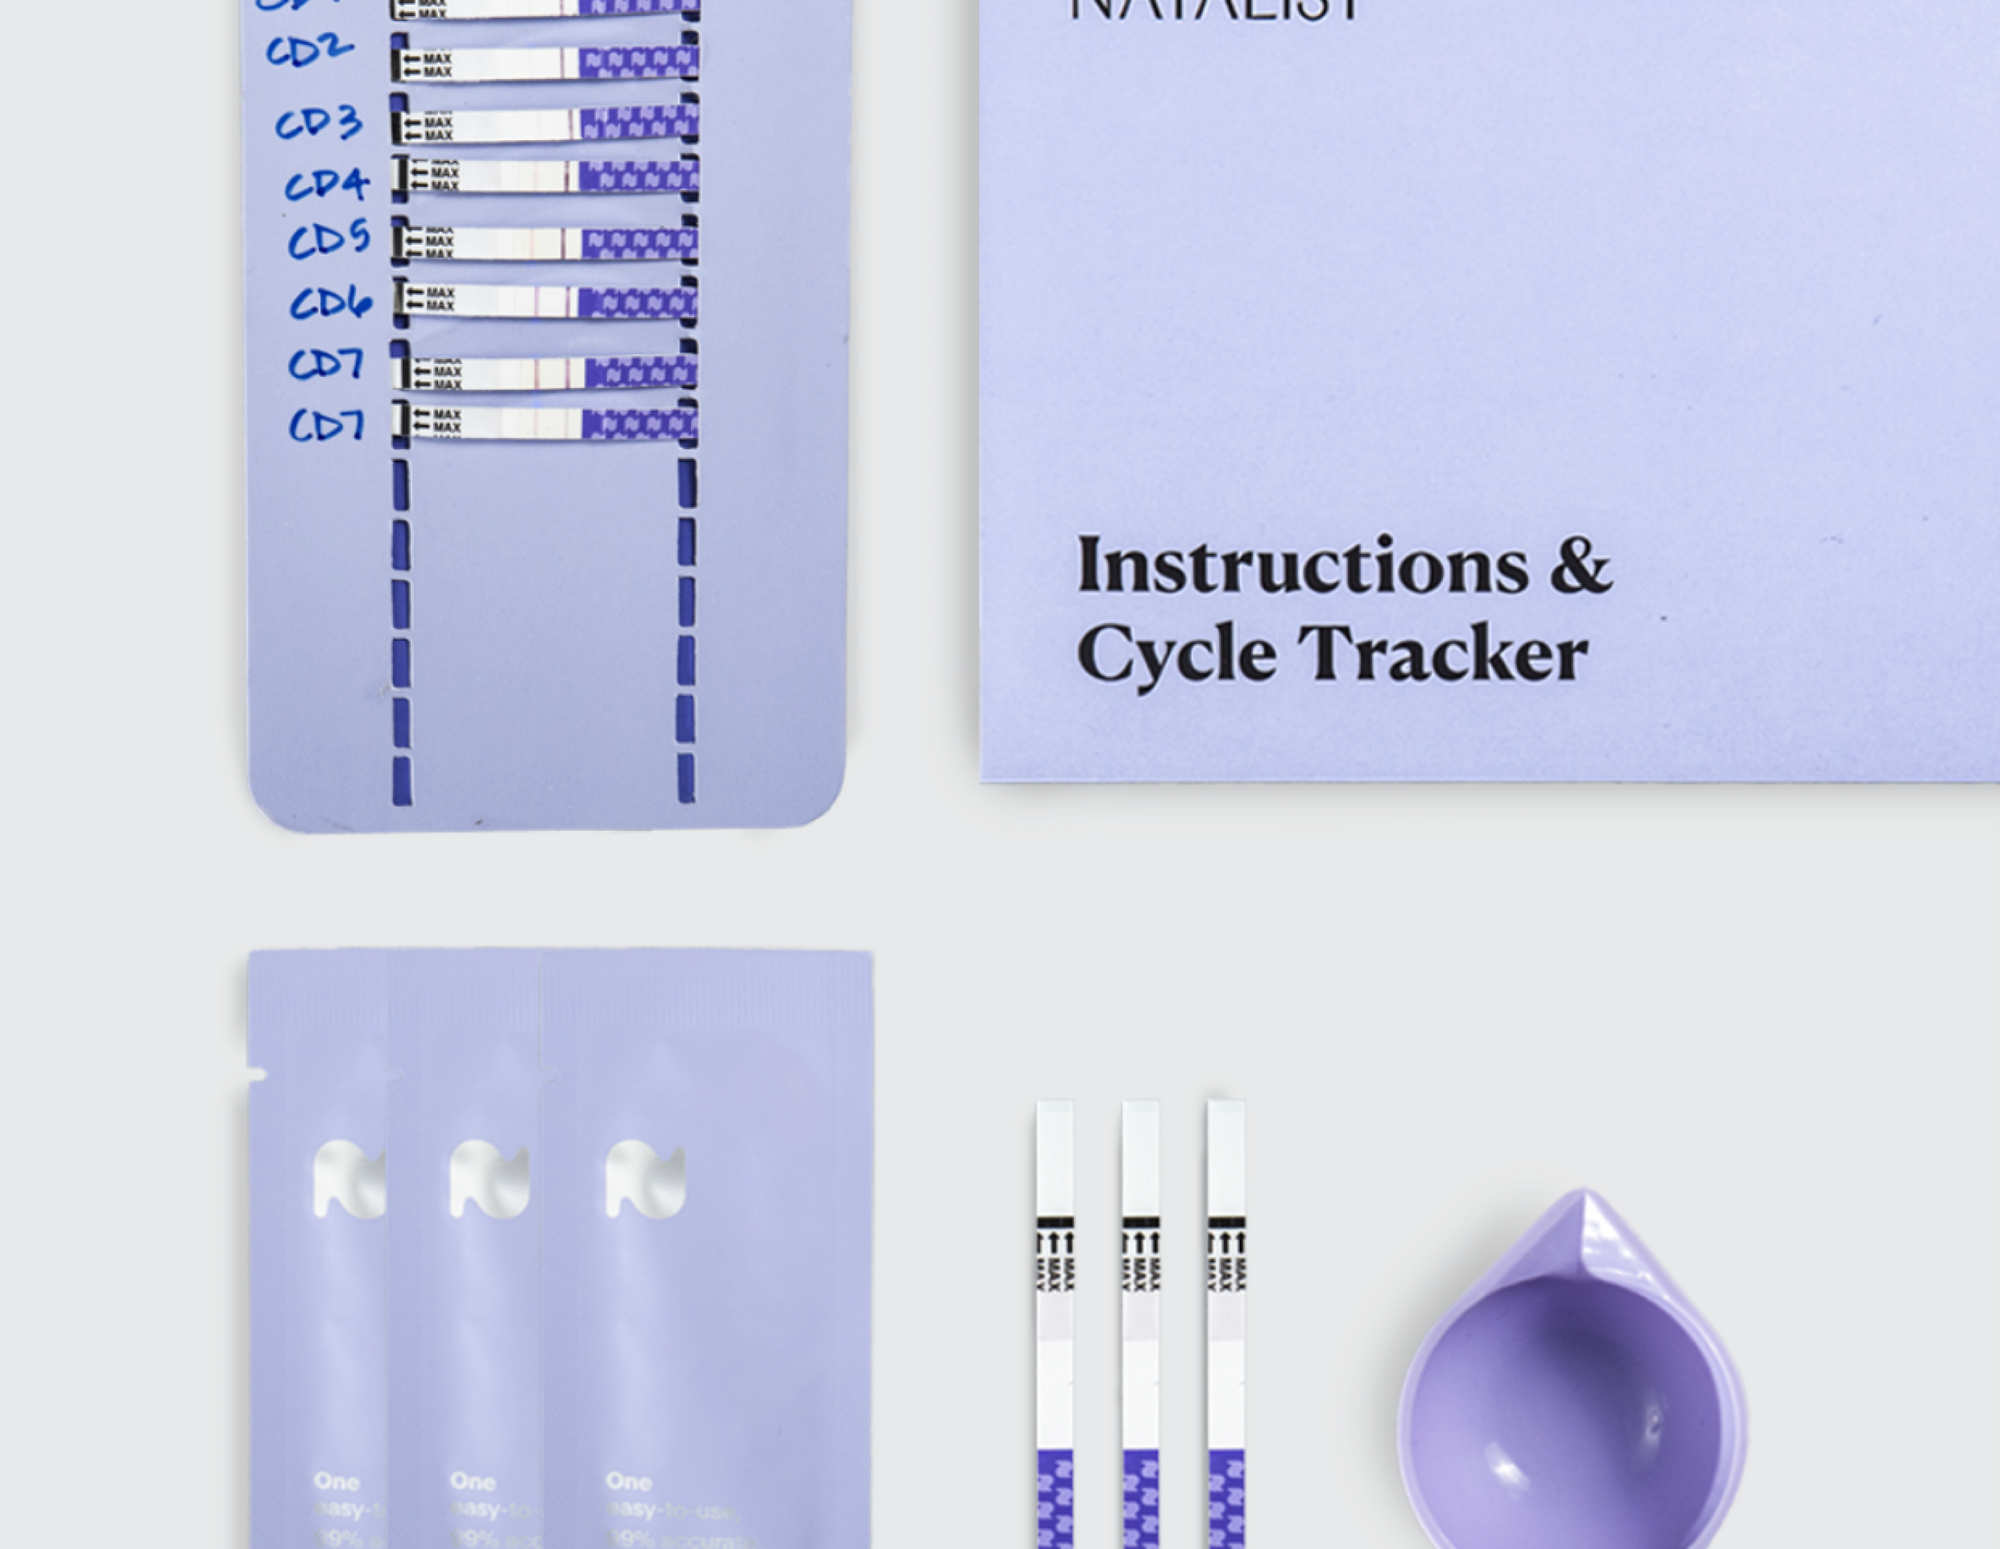 Ovulation Calculator and Calendar - Track Your Most Fertile Days